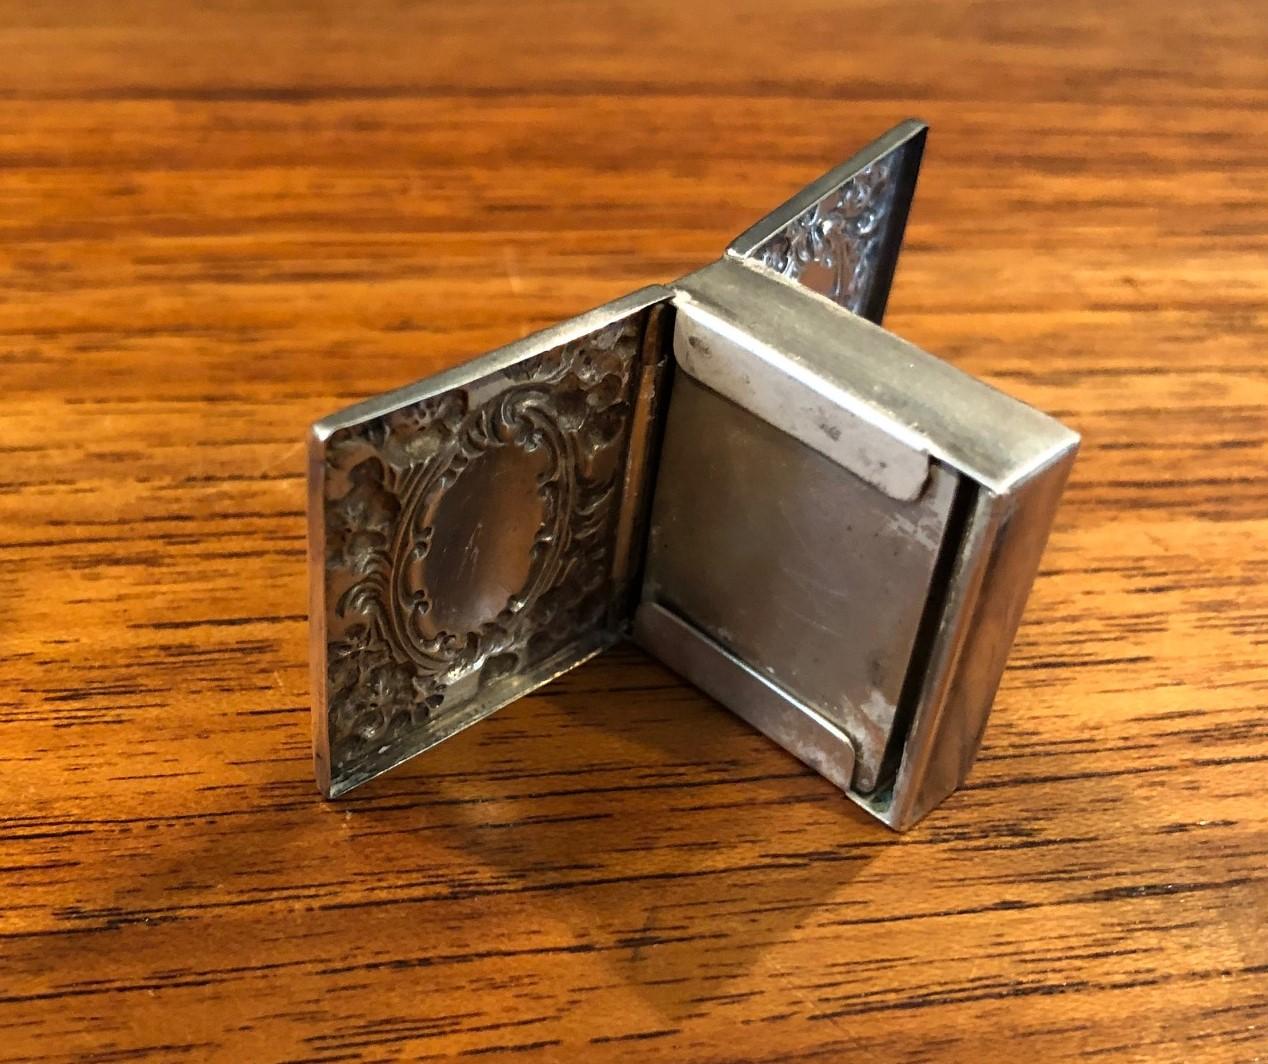 A fine quality Victorian sterling silver double sided stamp box by Whiting Manufacturing Co. of New York, circa 1900. The piece is of rectangular form with richly engraved repousse top and bottom and is spring loaded on both sides and hallmarked as